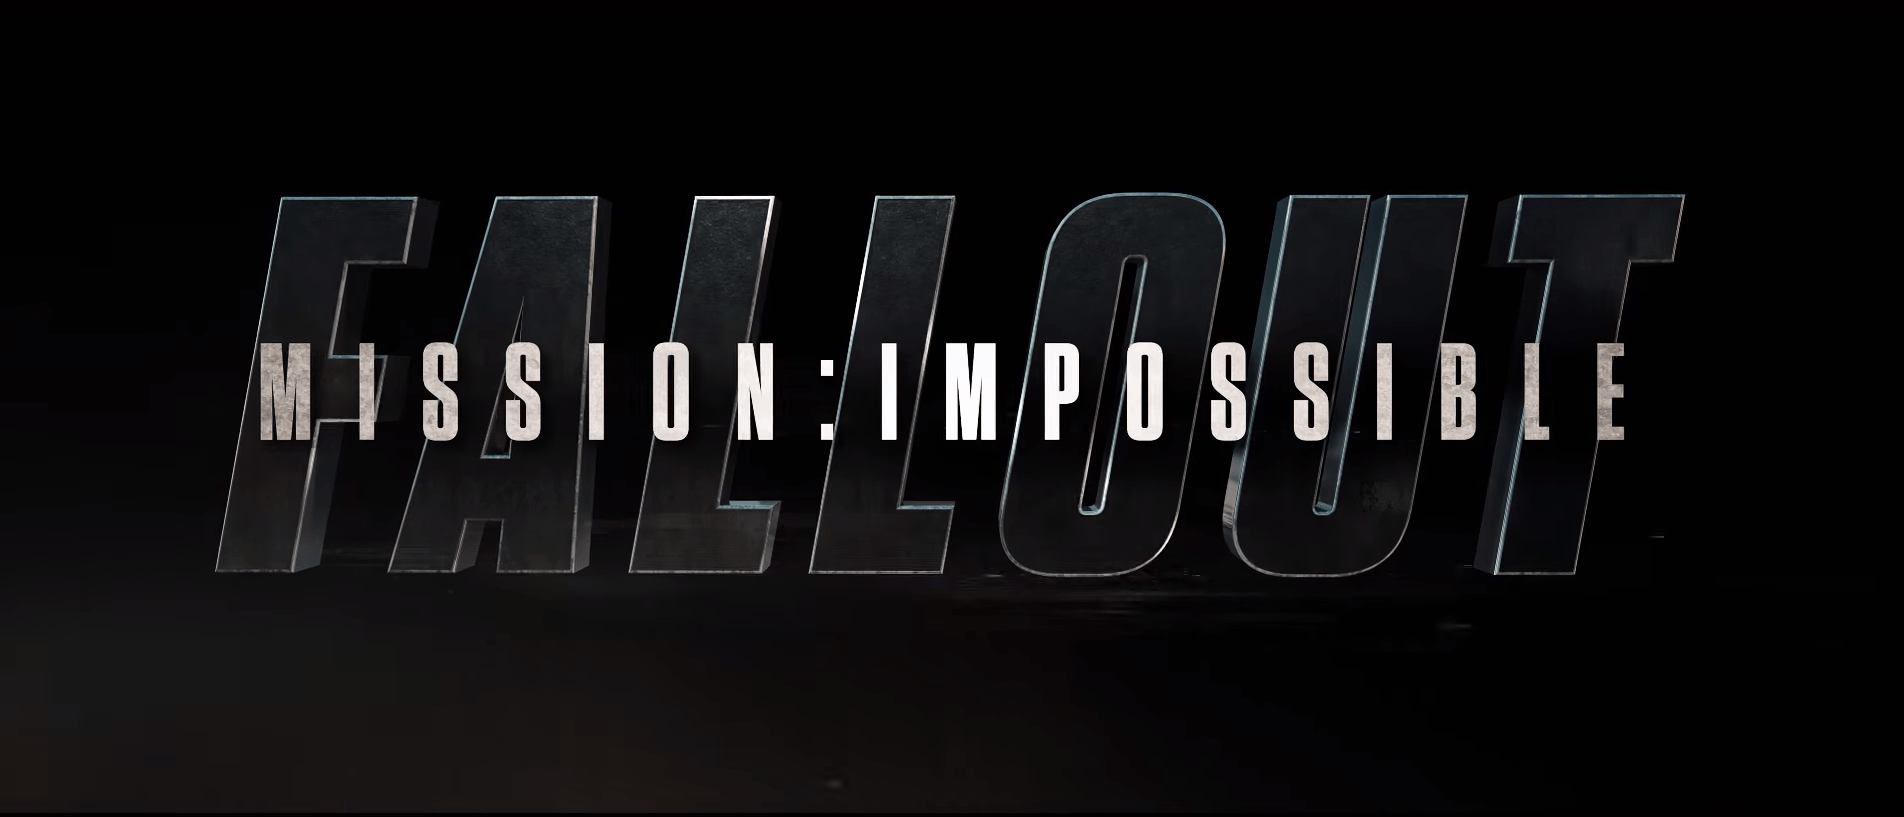 Mission Impossible Fallout HD Wallpapers Pictures and Image